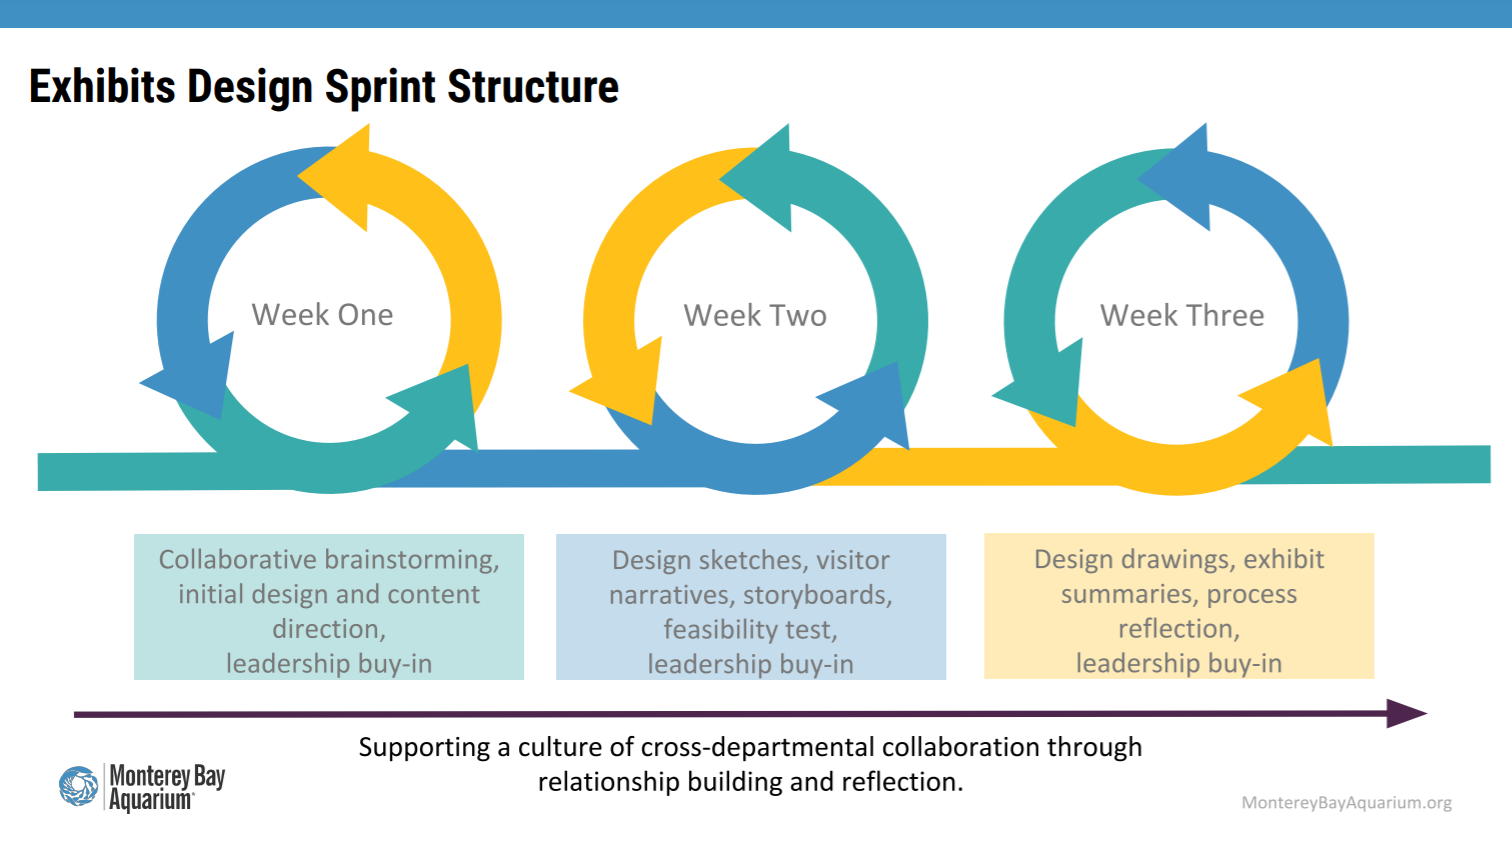 A graphic with the Monterey Bay Aquarium logo titled "Exhibits Design Sprint Structure," reading "Week One: collaborative brainstorming, initial design and content direction, leadership buy-in;" "Week Two: Design sketches, visitor narratives, storyboards, feasibility test, leadership buy-in;" and "Week Three: Design drawings, exhibit summaries, process reflection, leadership buy-in." A caption underneath reads "Supporting a culture of cross-departmental collaboration through relationship building and reflection."